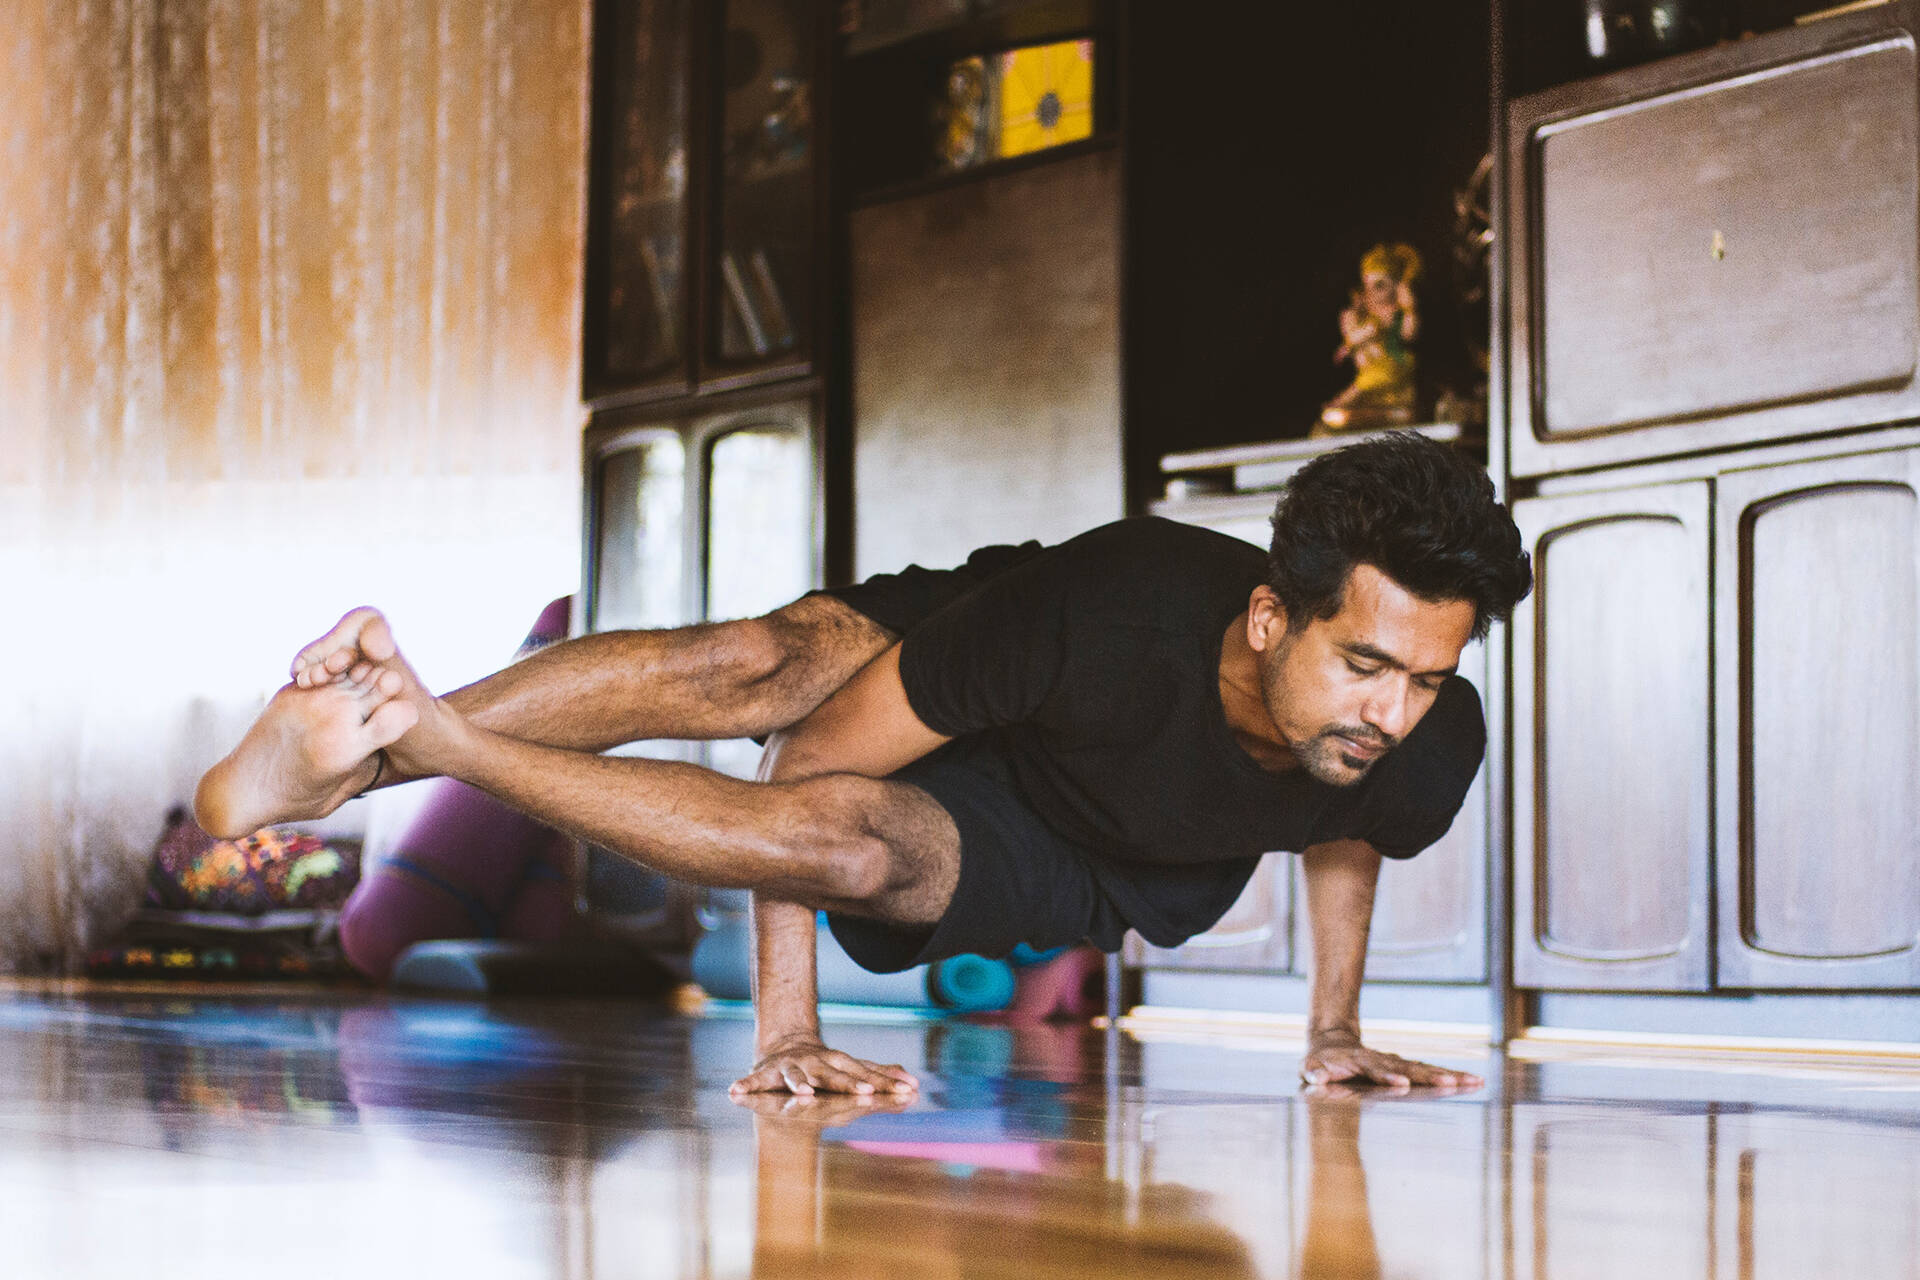 Man practising yoga pose on the floor in his house